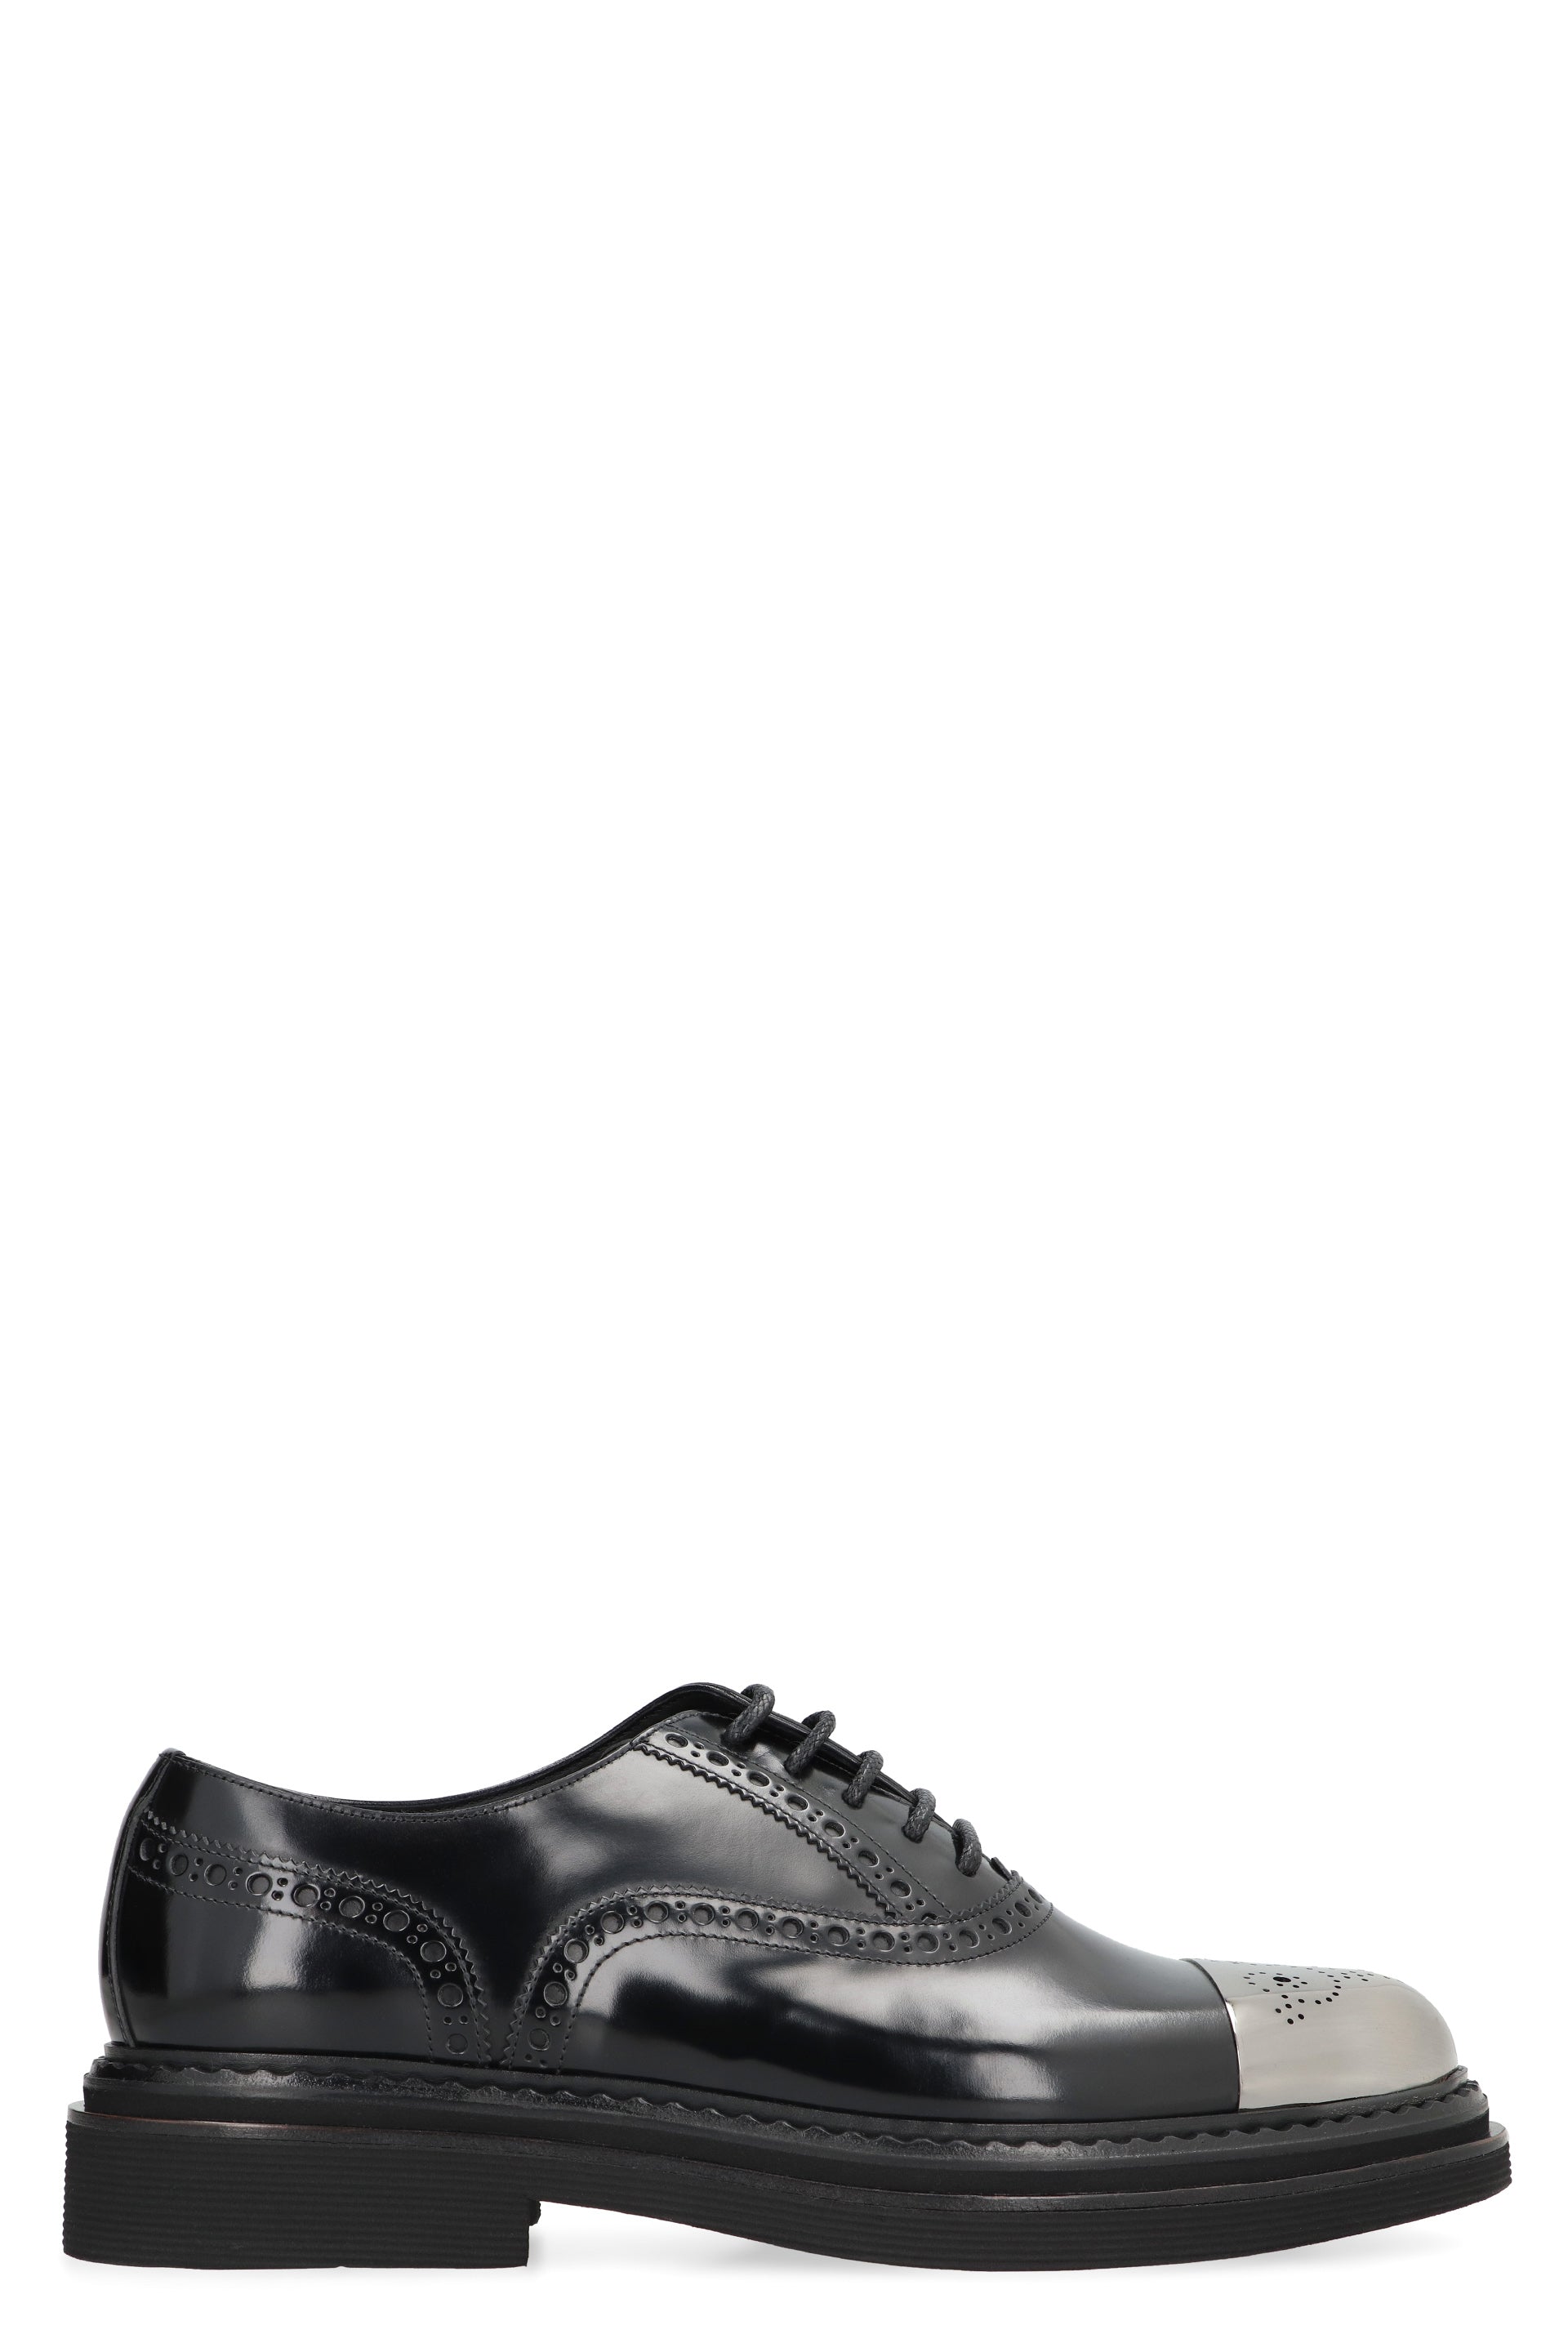 Dolce & Gabbana Men's Black Leather Lace-up Brogues For Fw24